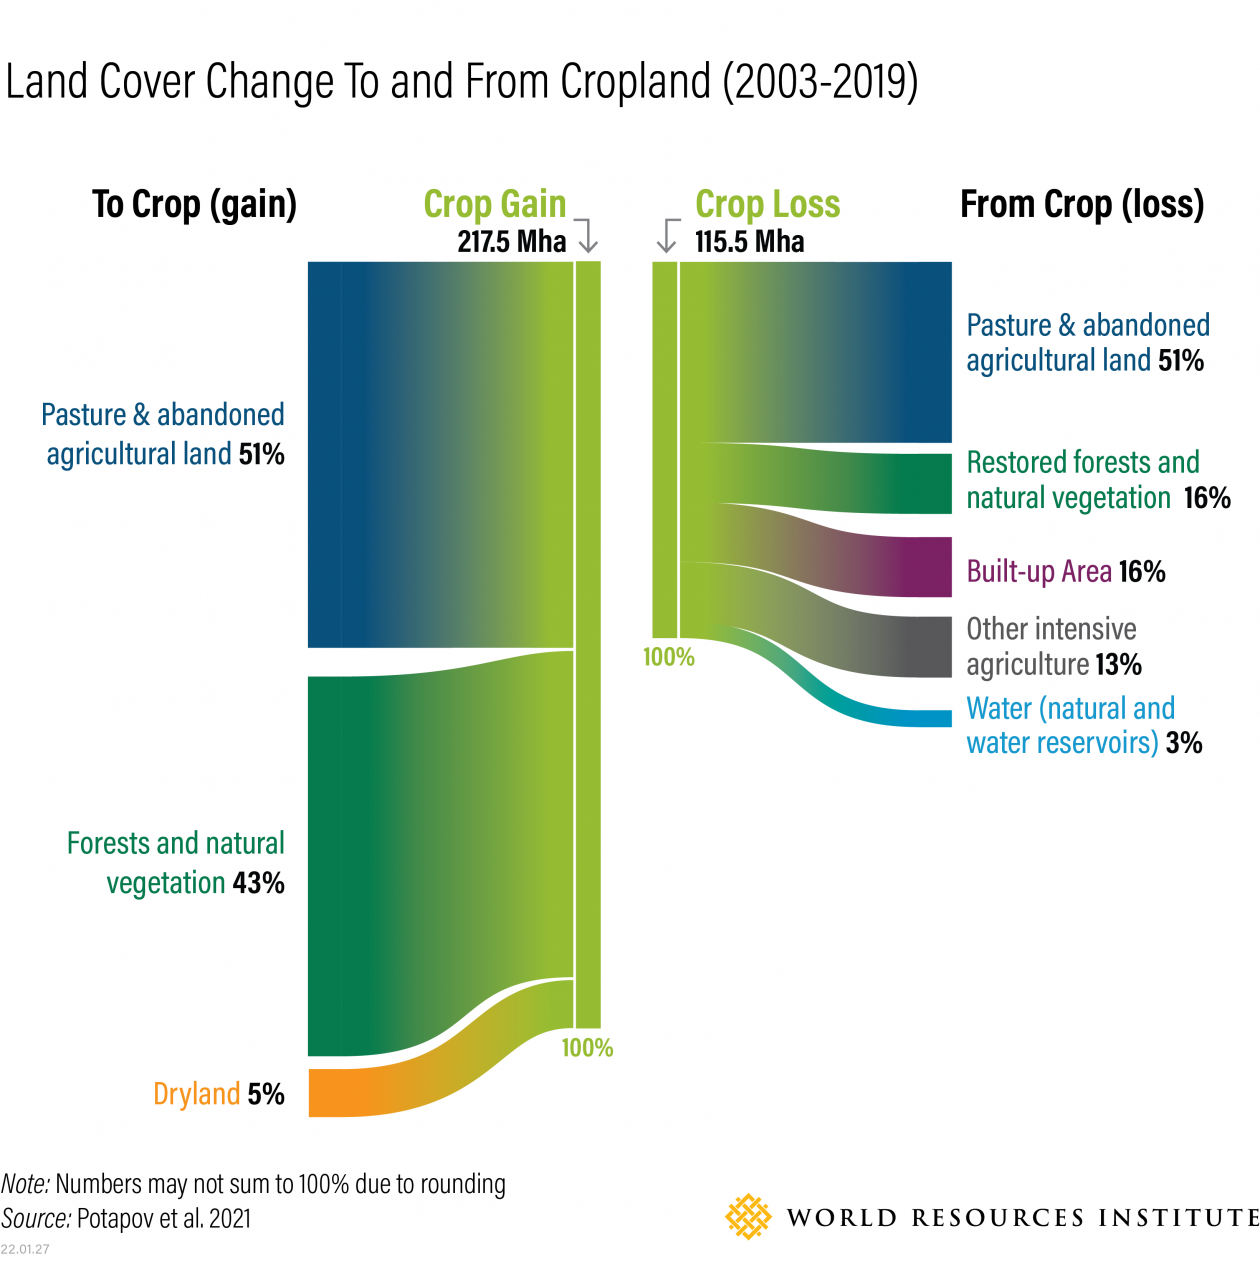 Diagram shows Land Cover Change to and from cropland